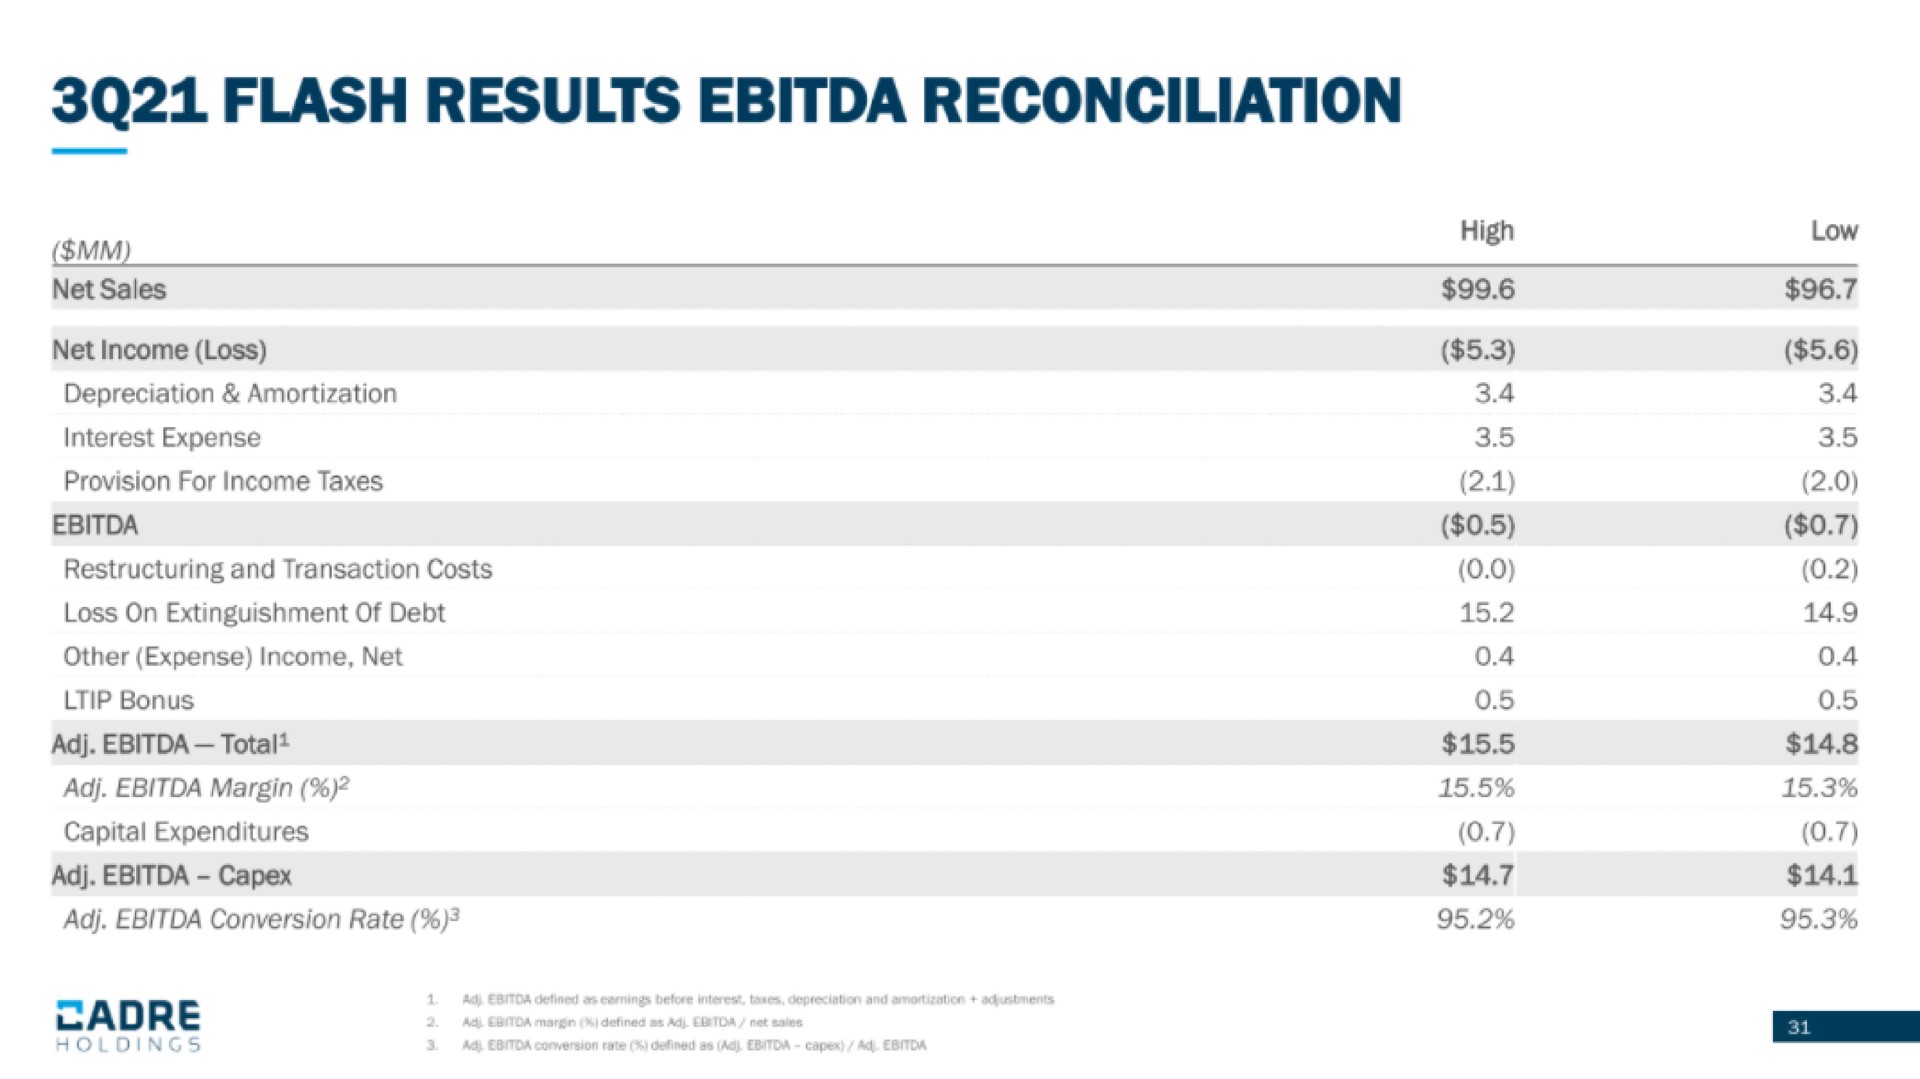 flash results reconciliation | Cadre Holdings